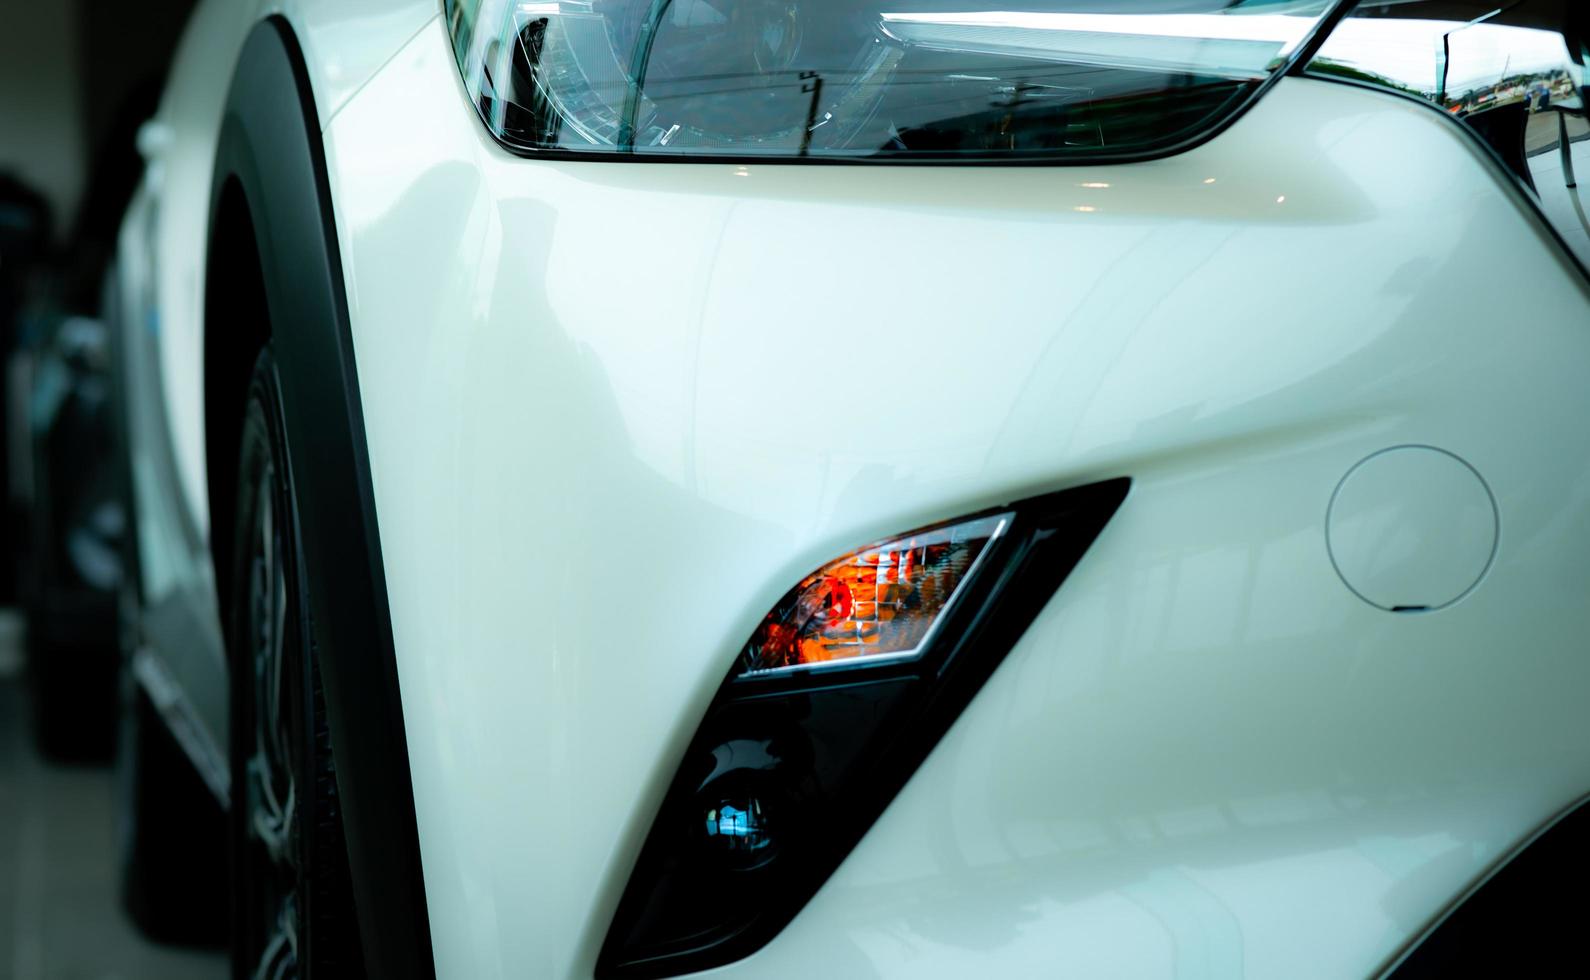 New luxury white car parked in modern showroom. Car dealership office. Electric or hybrid car technology and business concept. Automotive industry. Selective focus on fog lamp of white car. photo